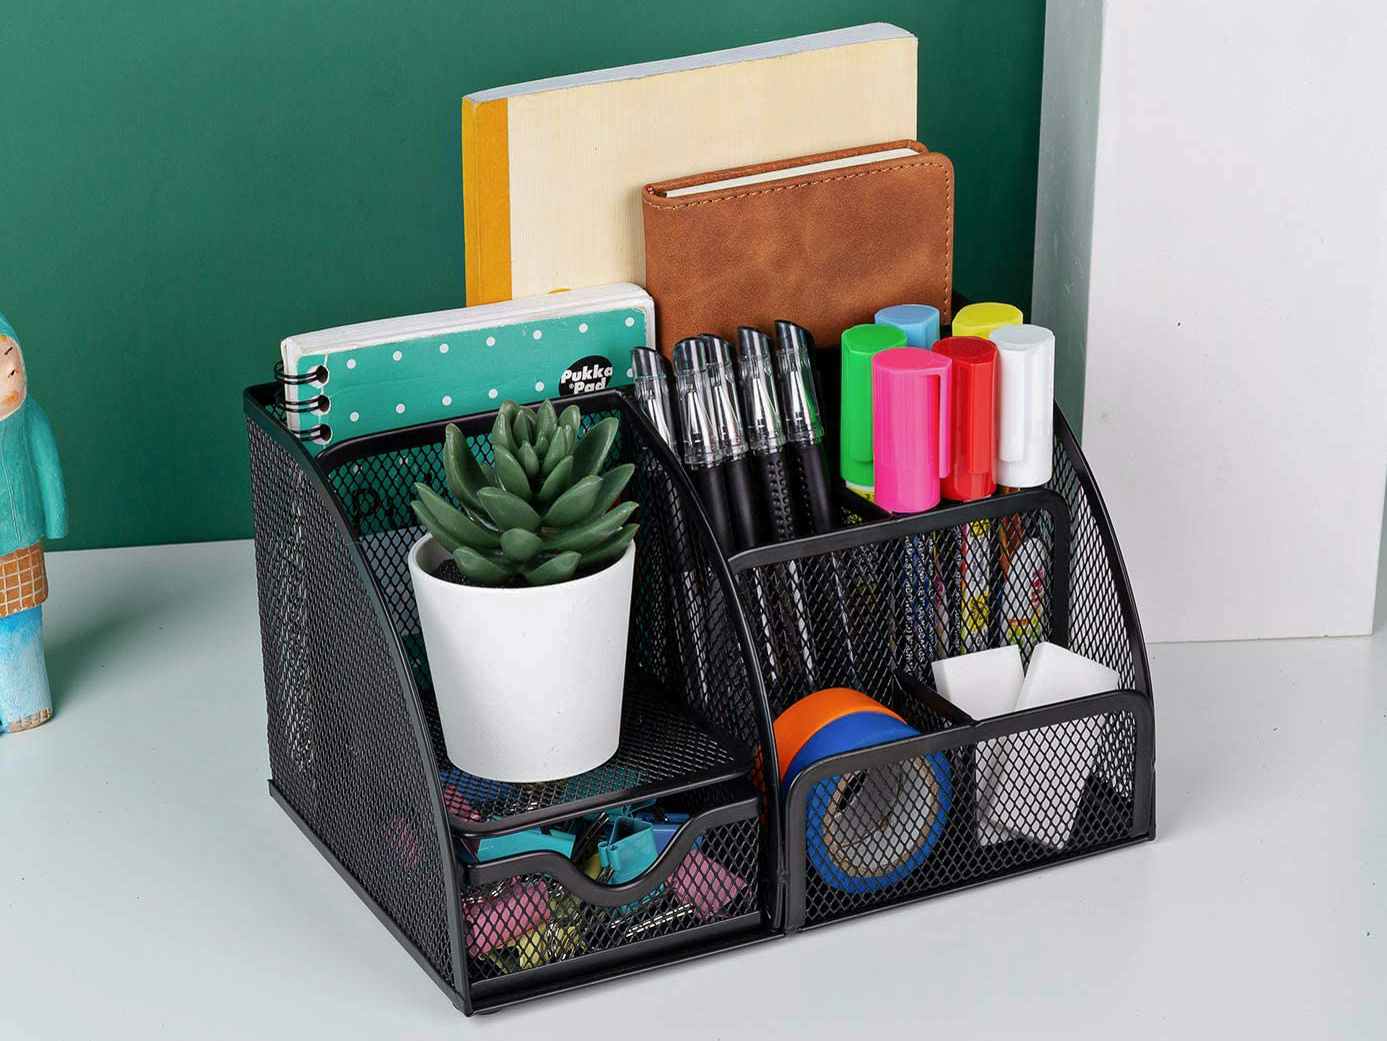 A mesh metal office desk organizer from Amazon, sitting on a desk.